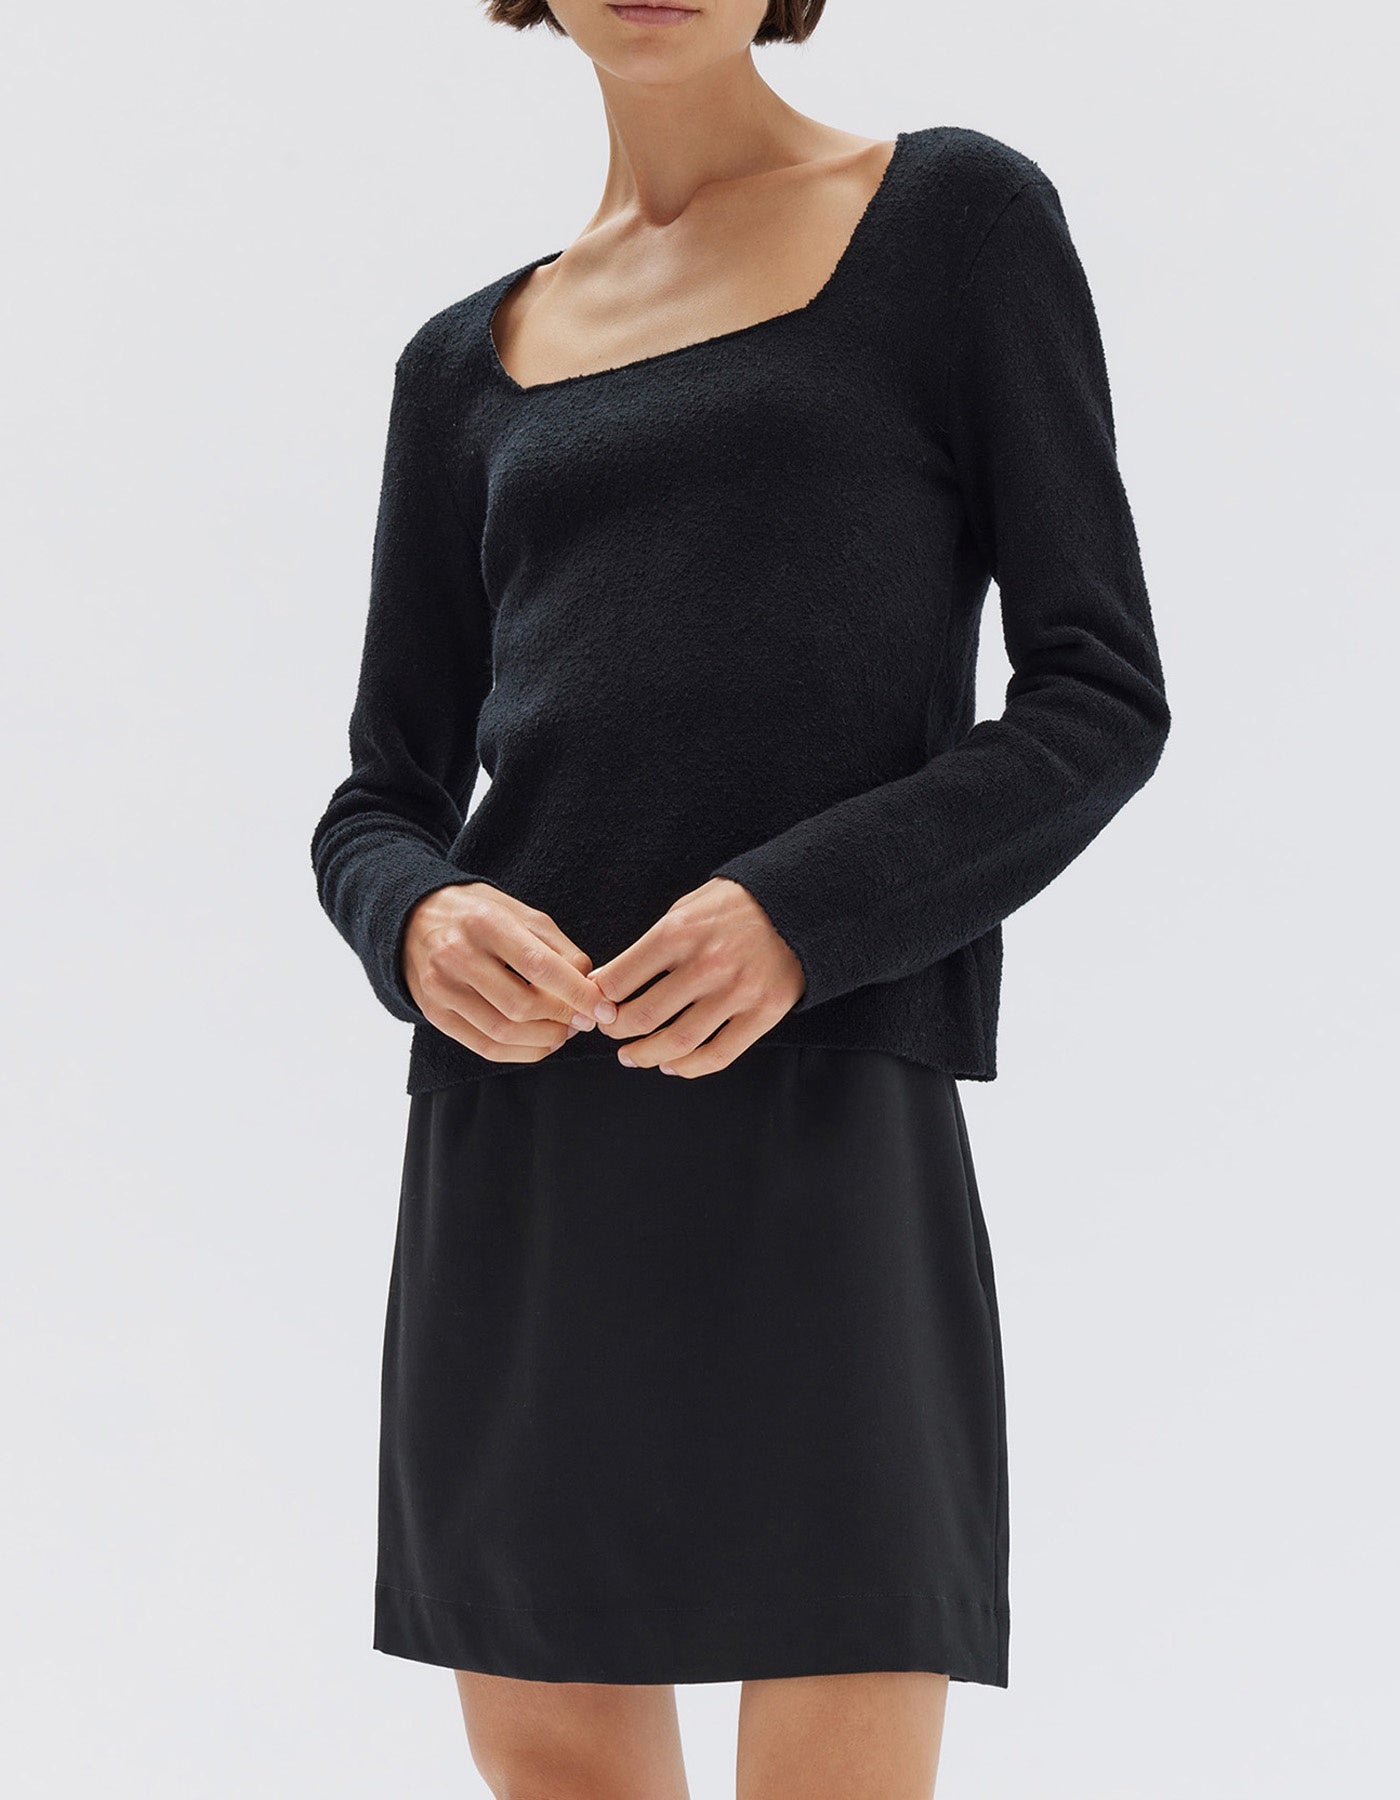 Assembly Label Meredith Square Neck Long Sleeve Top Black